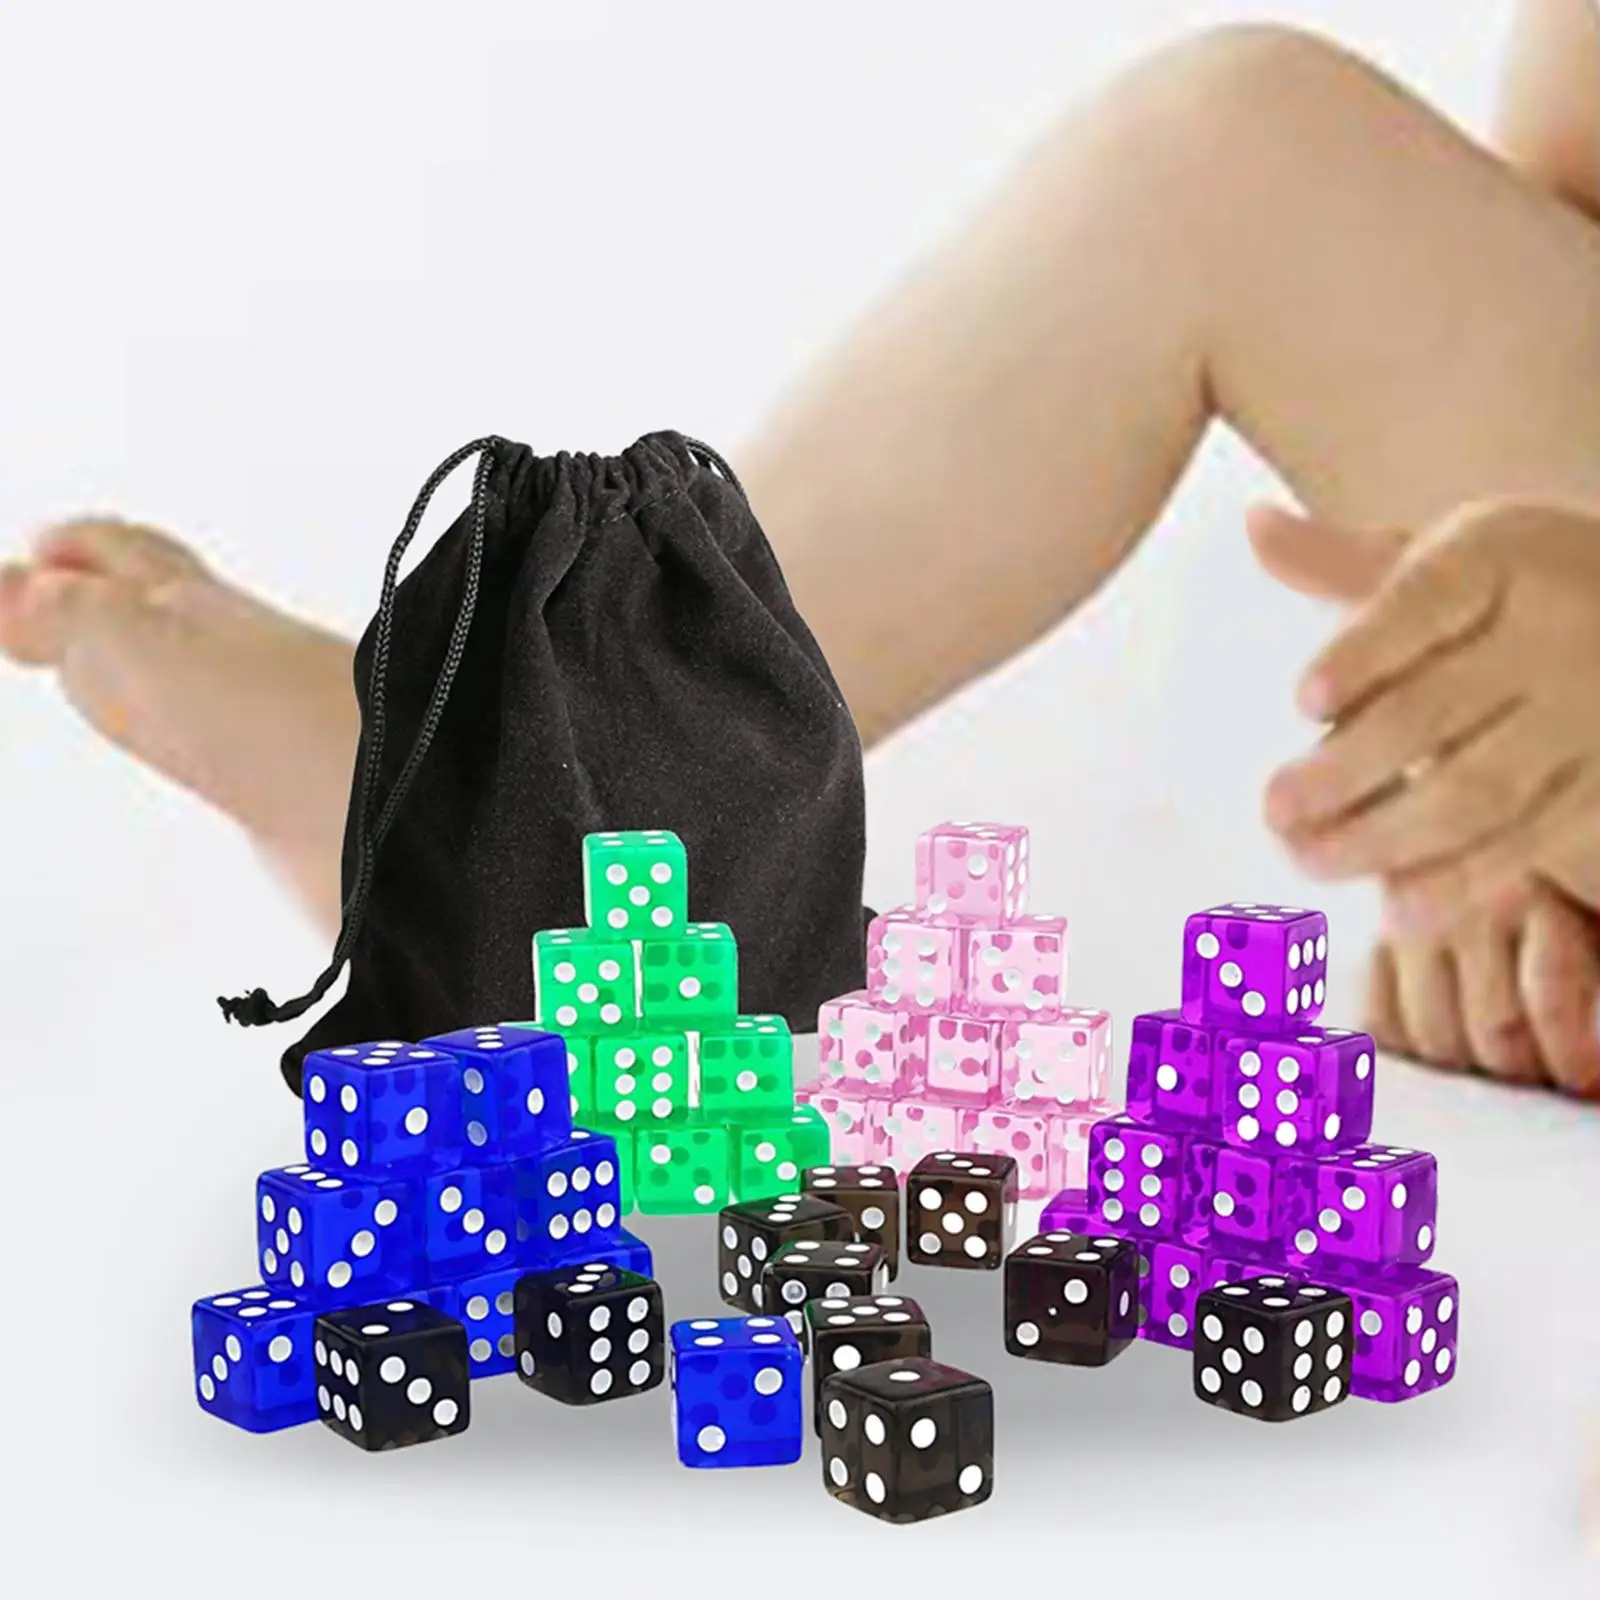 50Pcs 6 Sided Dices Set, Party Game Dices, Math Counting Teaching Aids, Party Favors